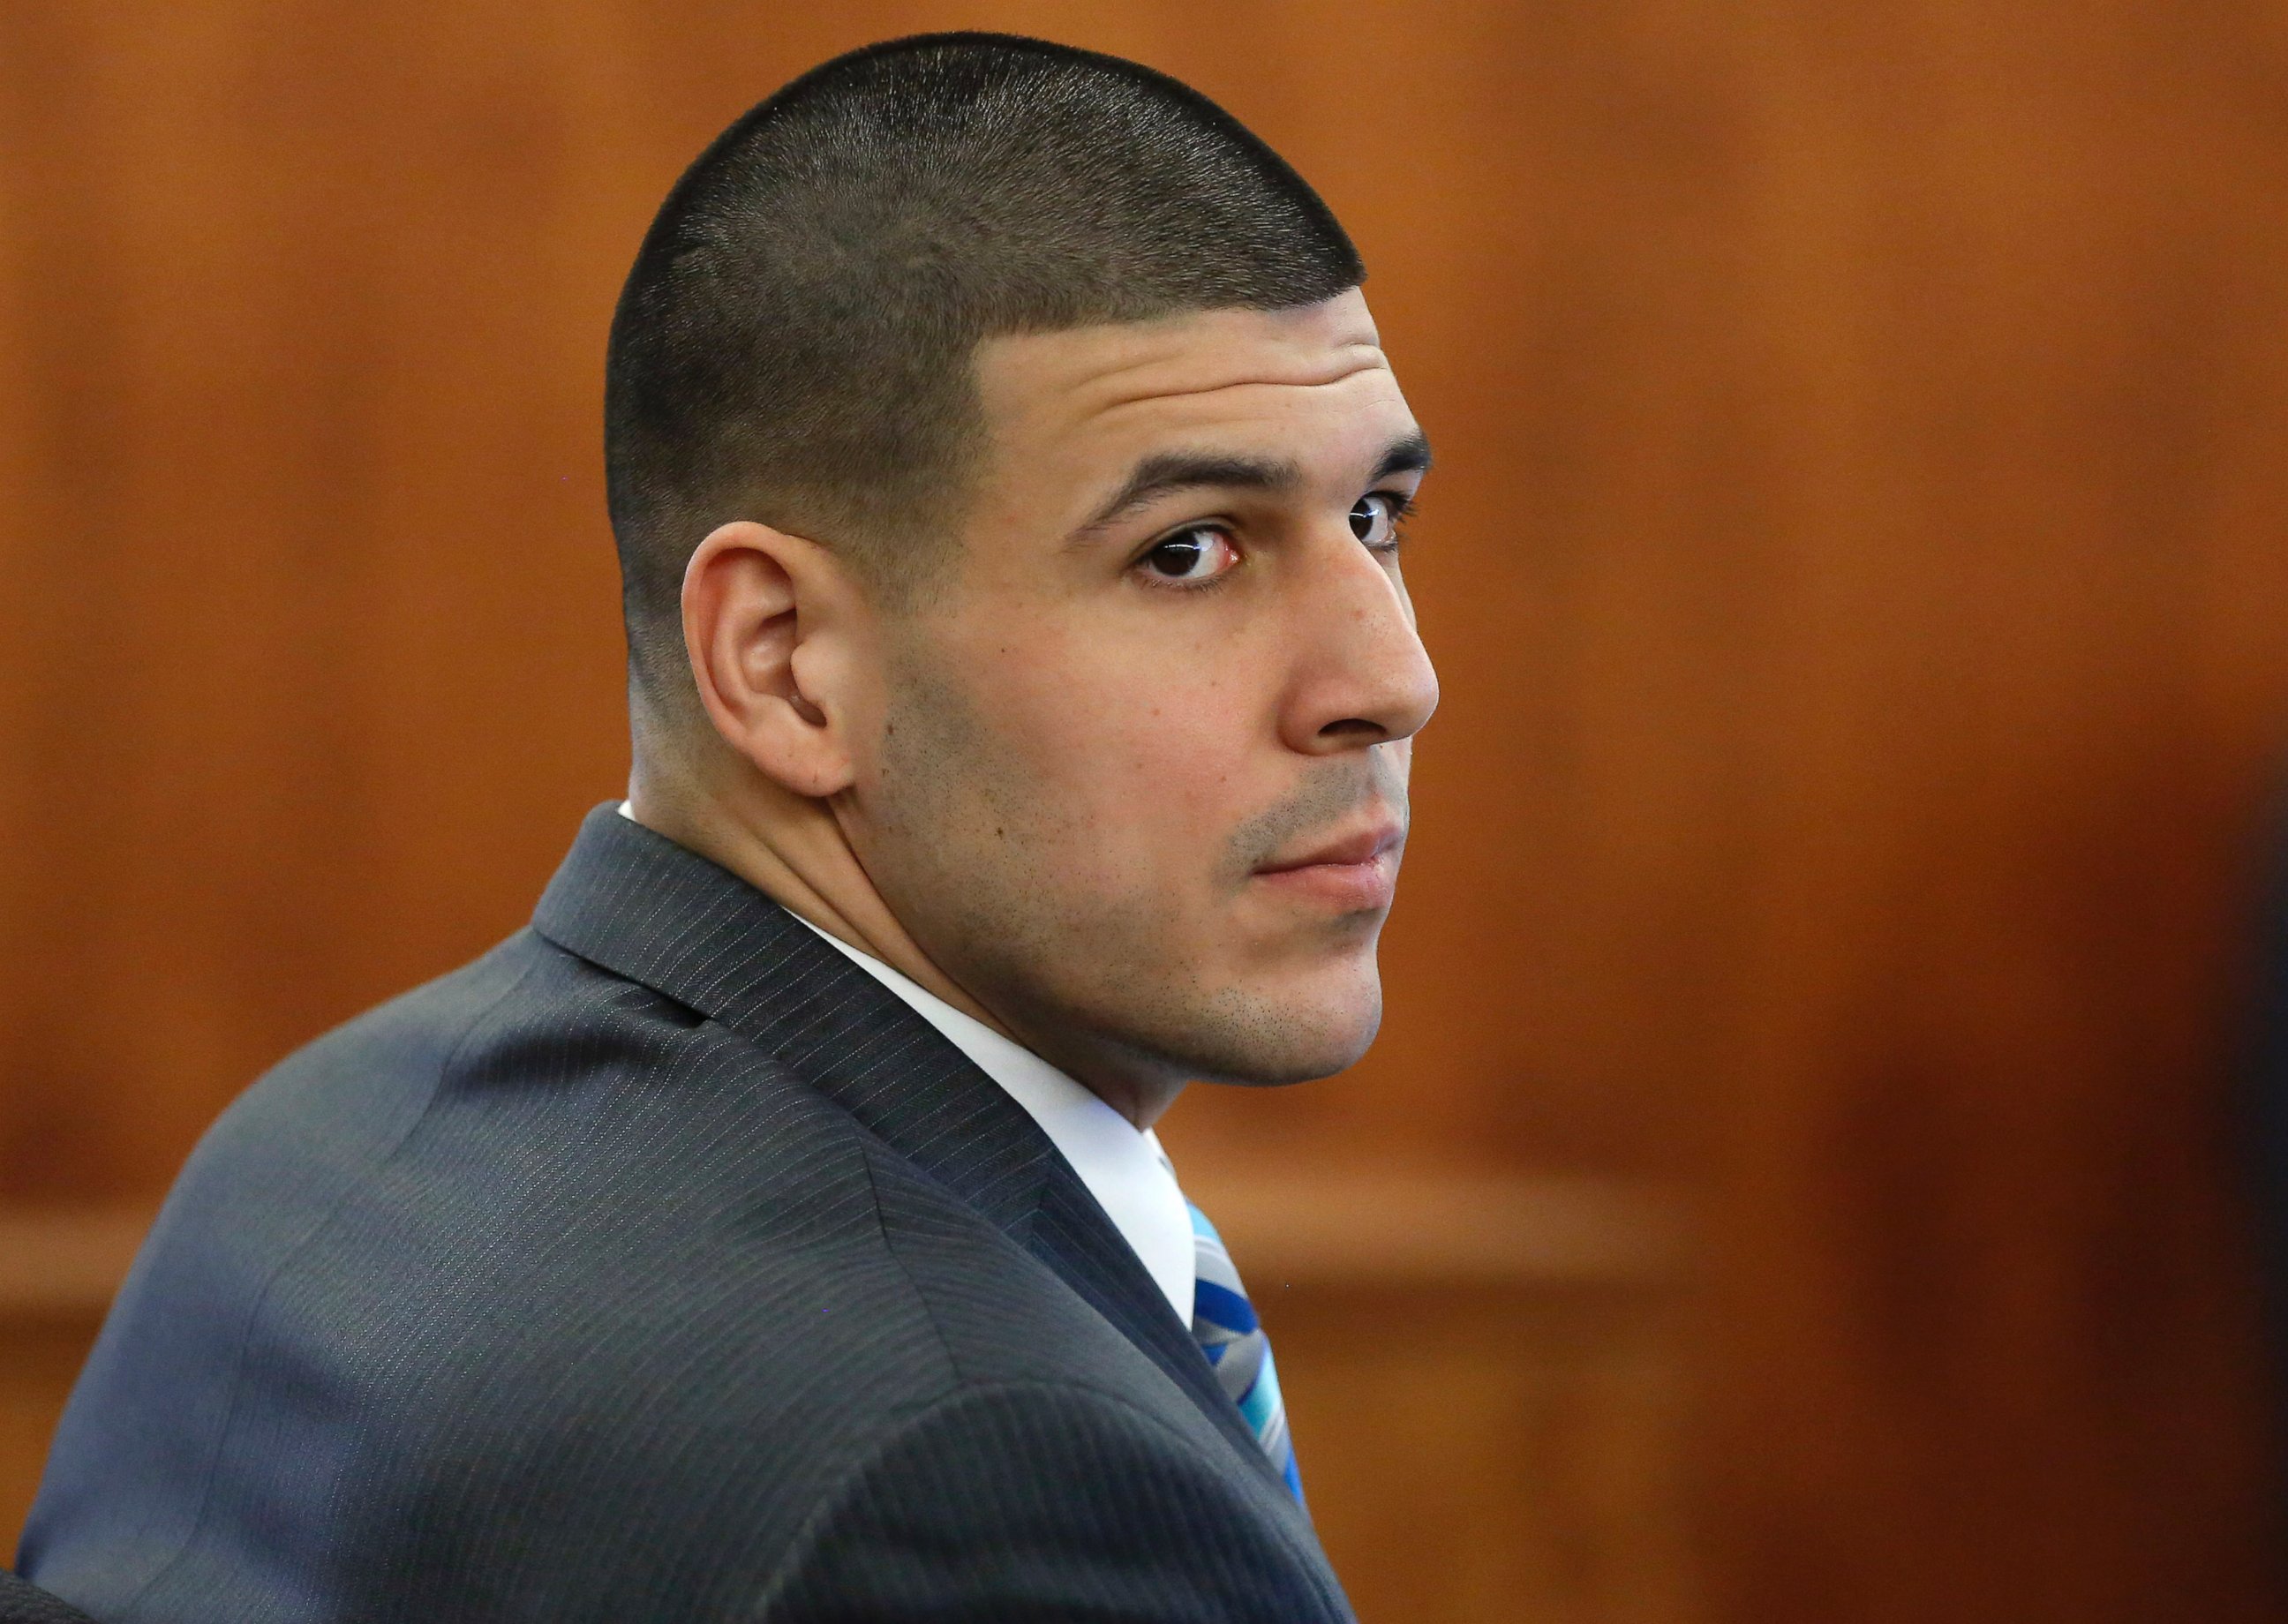 PHOTO: Former New England Patriots football player Aaron Hernandez sits during his murder trial, March 19, 2015, in Fall River, Mass.